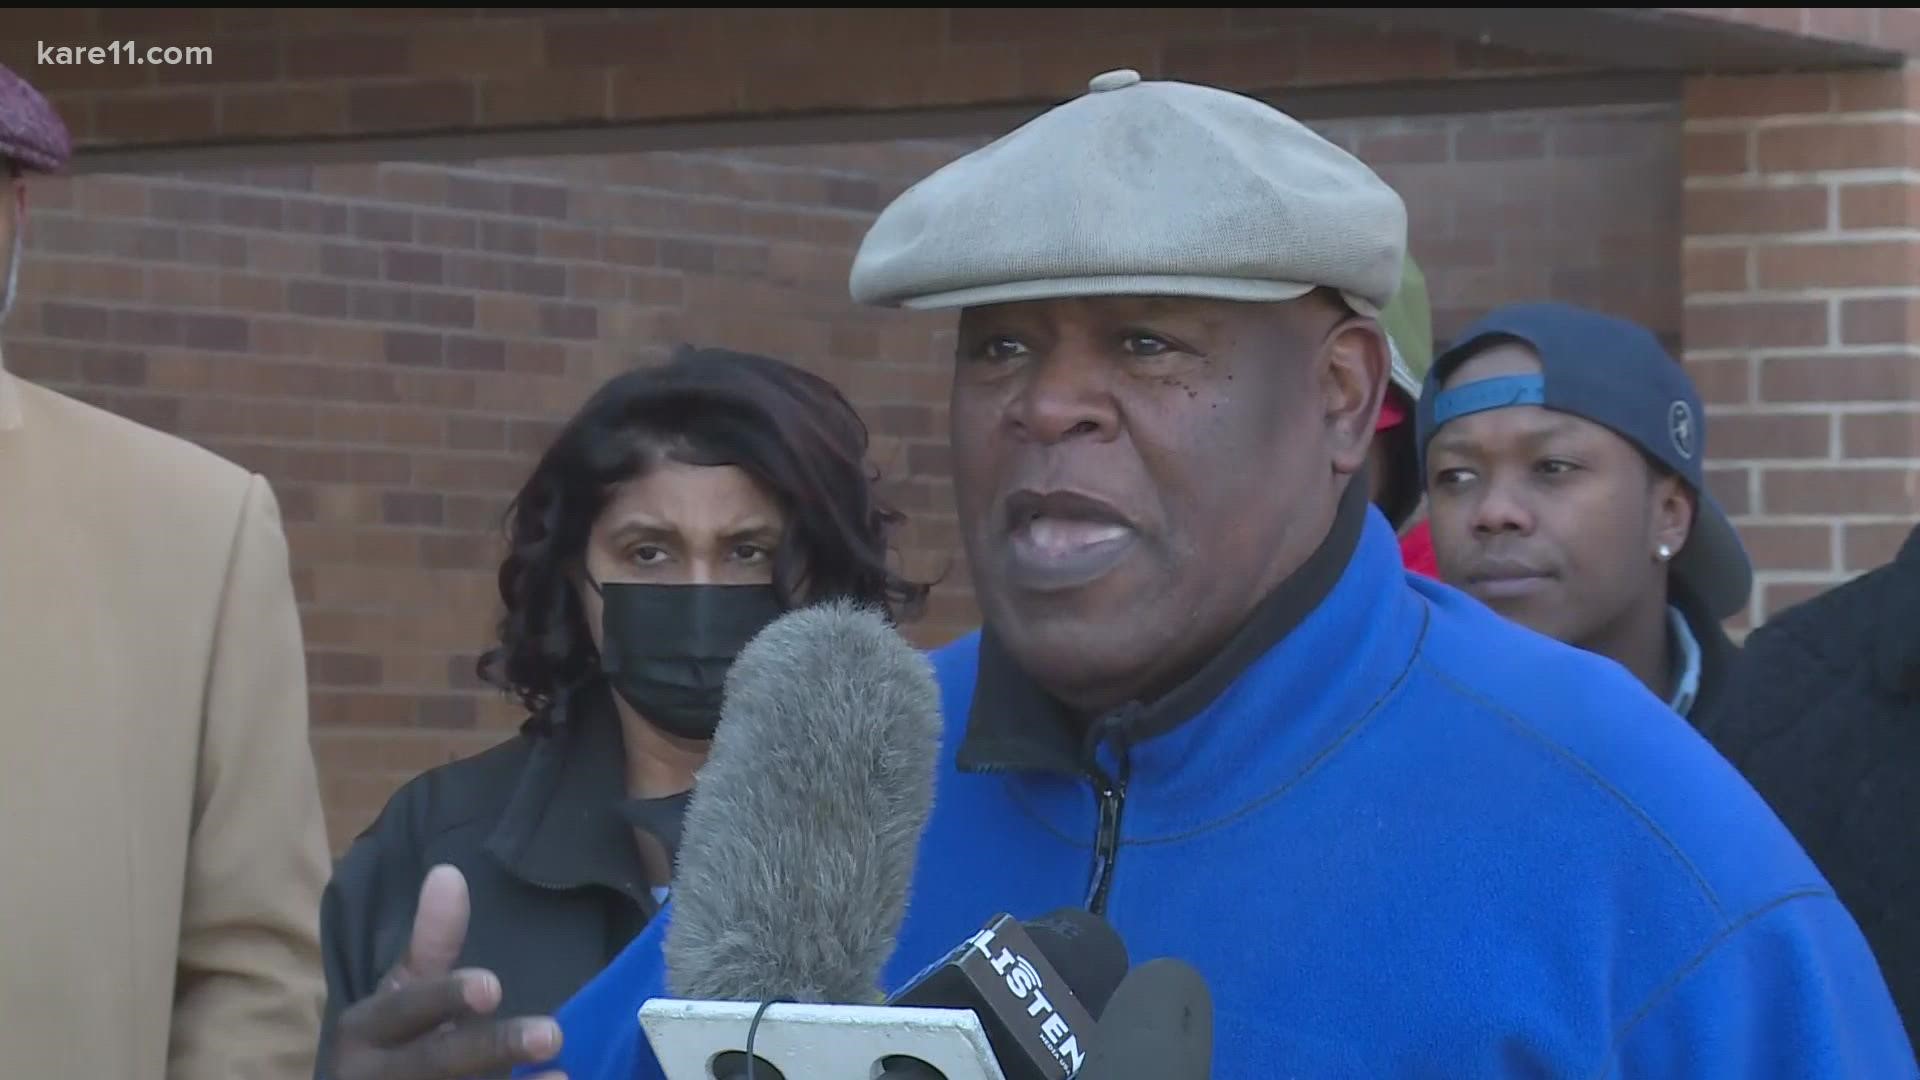 At a press conference outside SPPS headquarters, faith leaders, community groups and parents addressed concerns, while others stood in support.